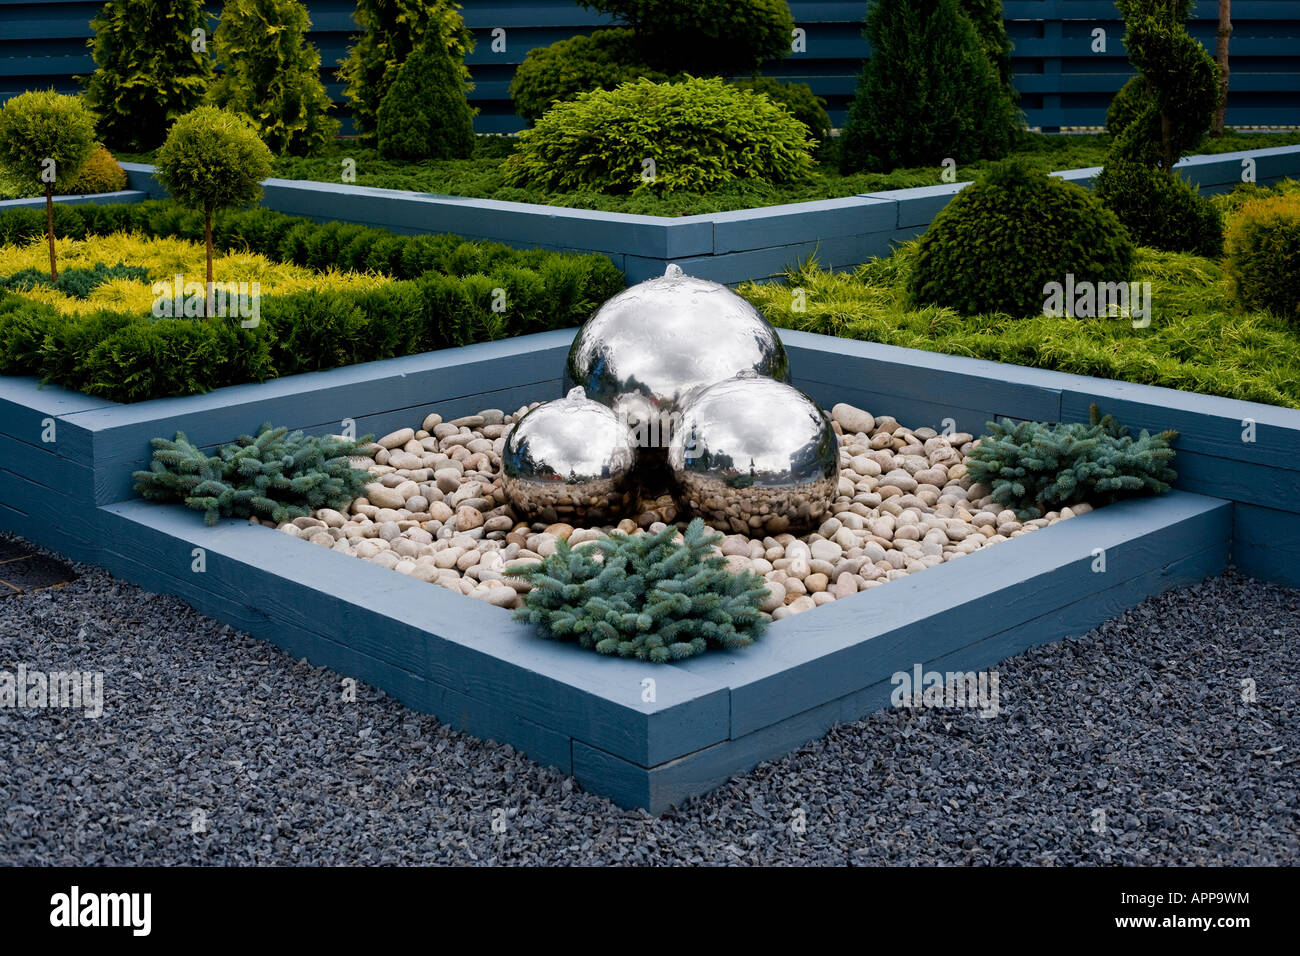 Stainless steel water feature with dwarf Picea (pine) and other conifers Stock Photo